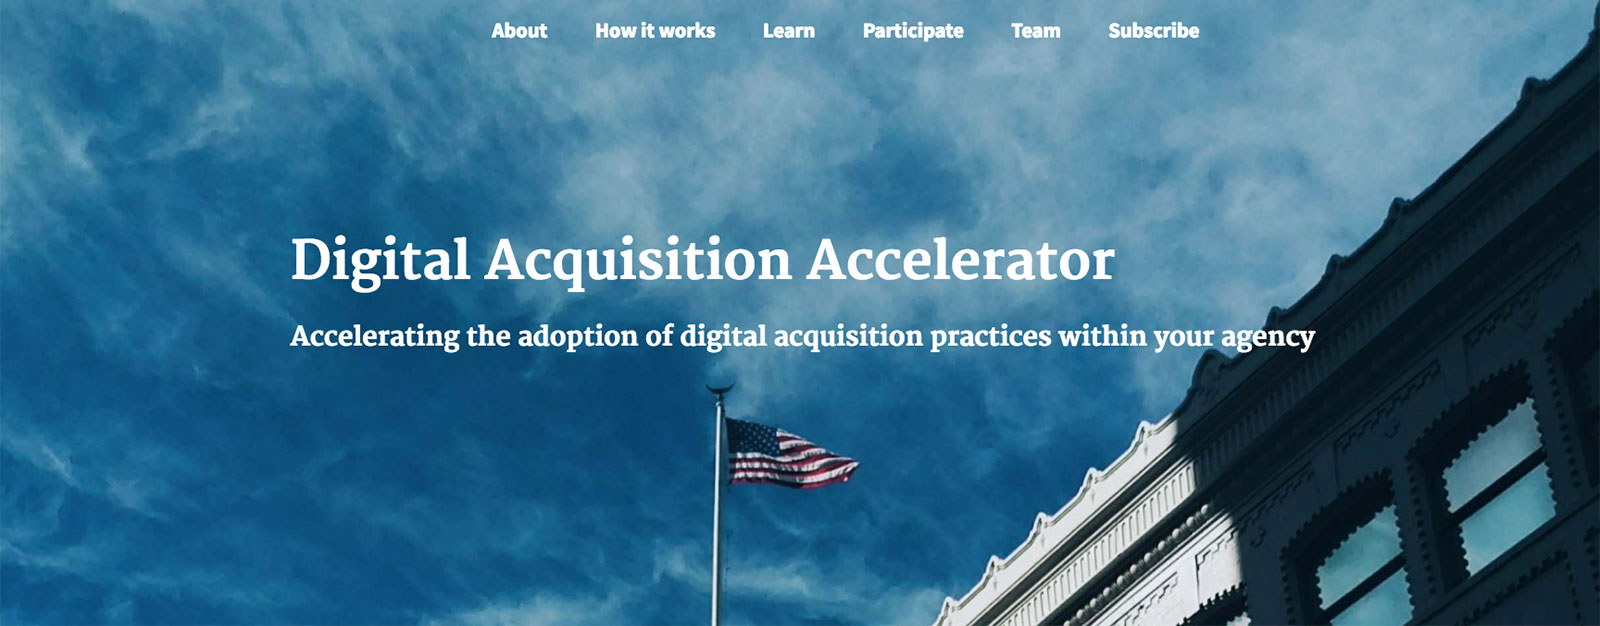 The Digital Acquisition Accelerator homepage